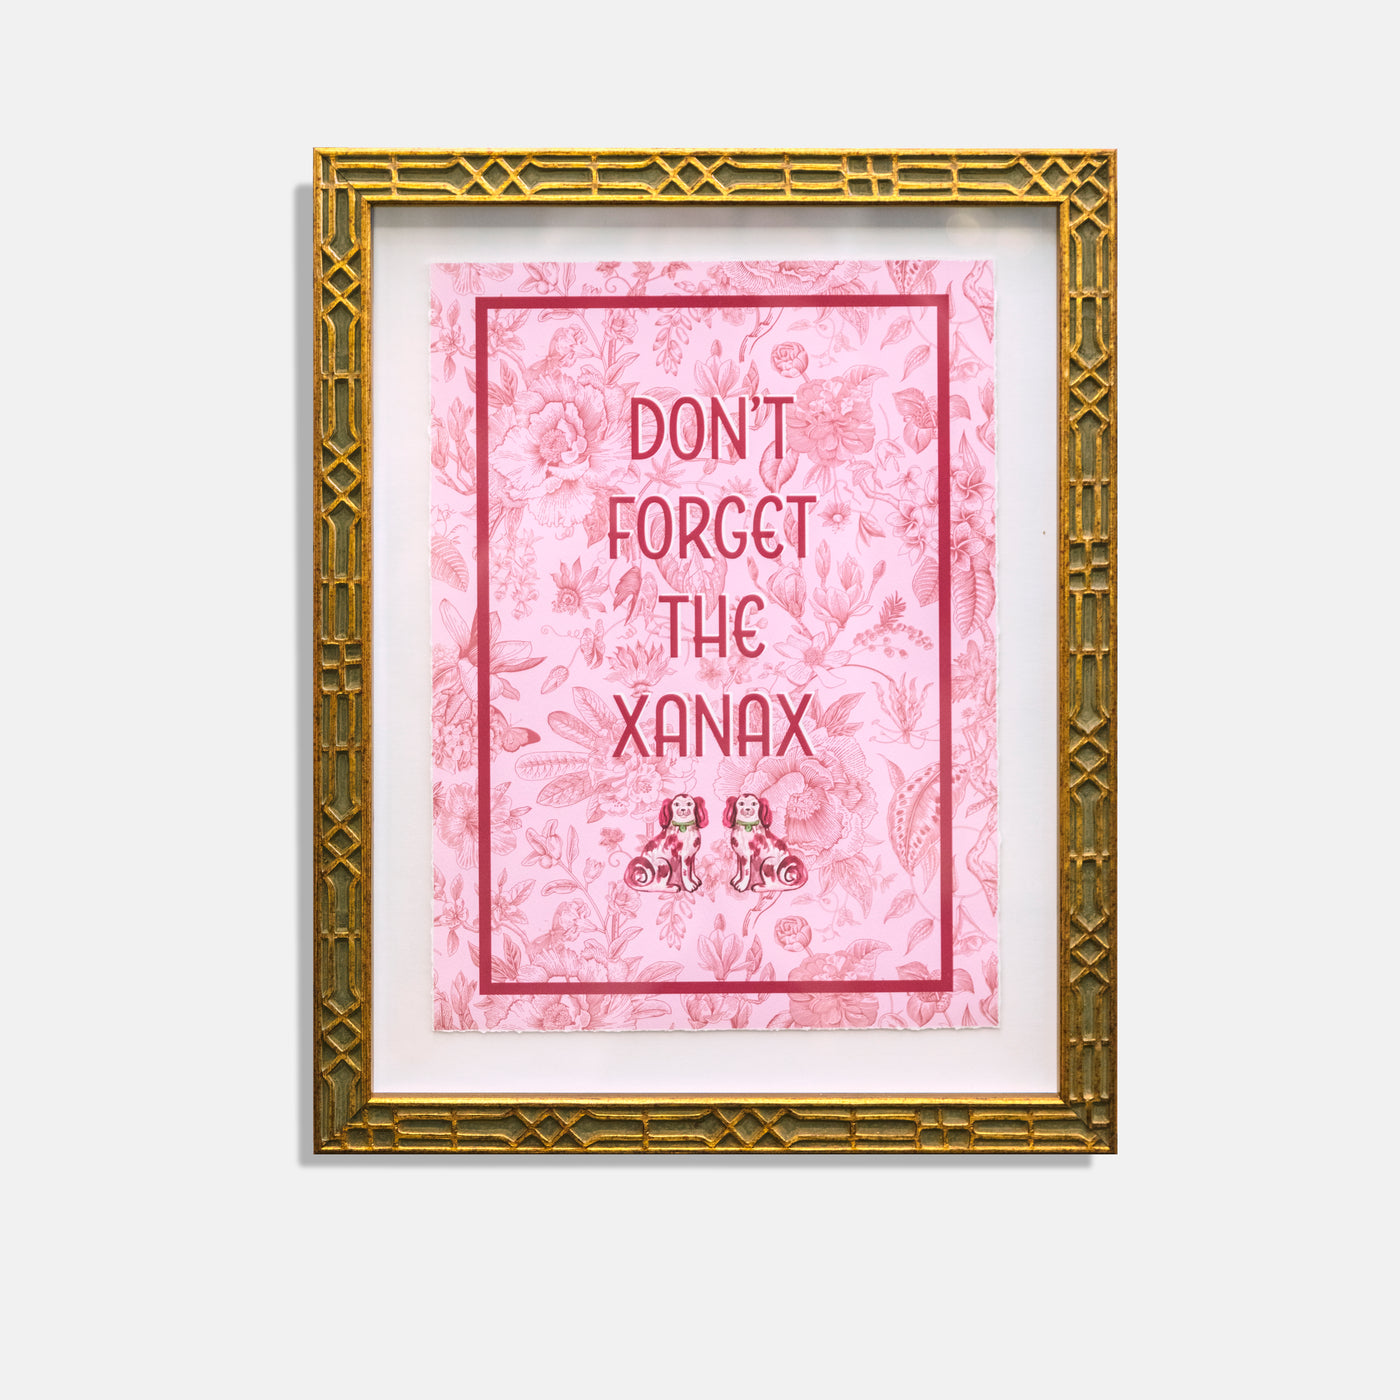 Floral pink print with text "Don't forget the xanax" with two small dogs in gold frame.